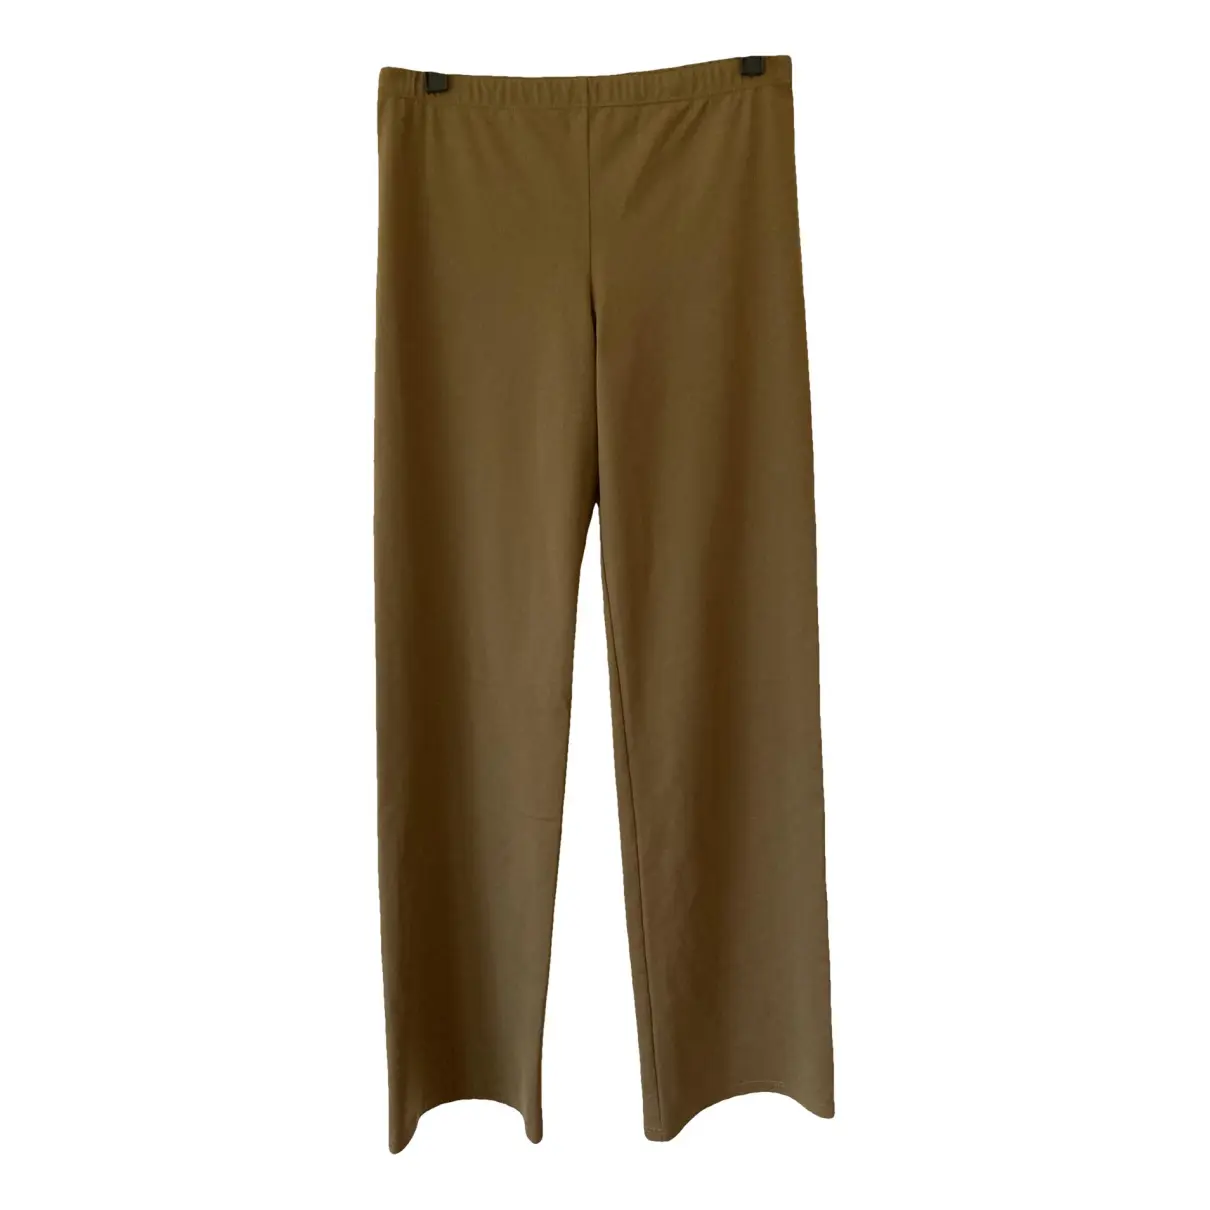 Straight pants Maryam Nassir Zadeh Beige size 4 US in Polyester